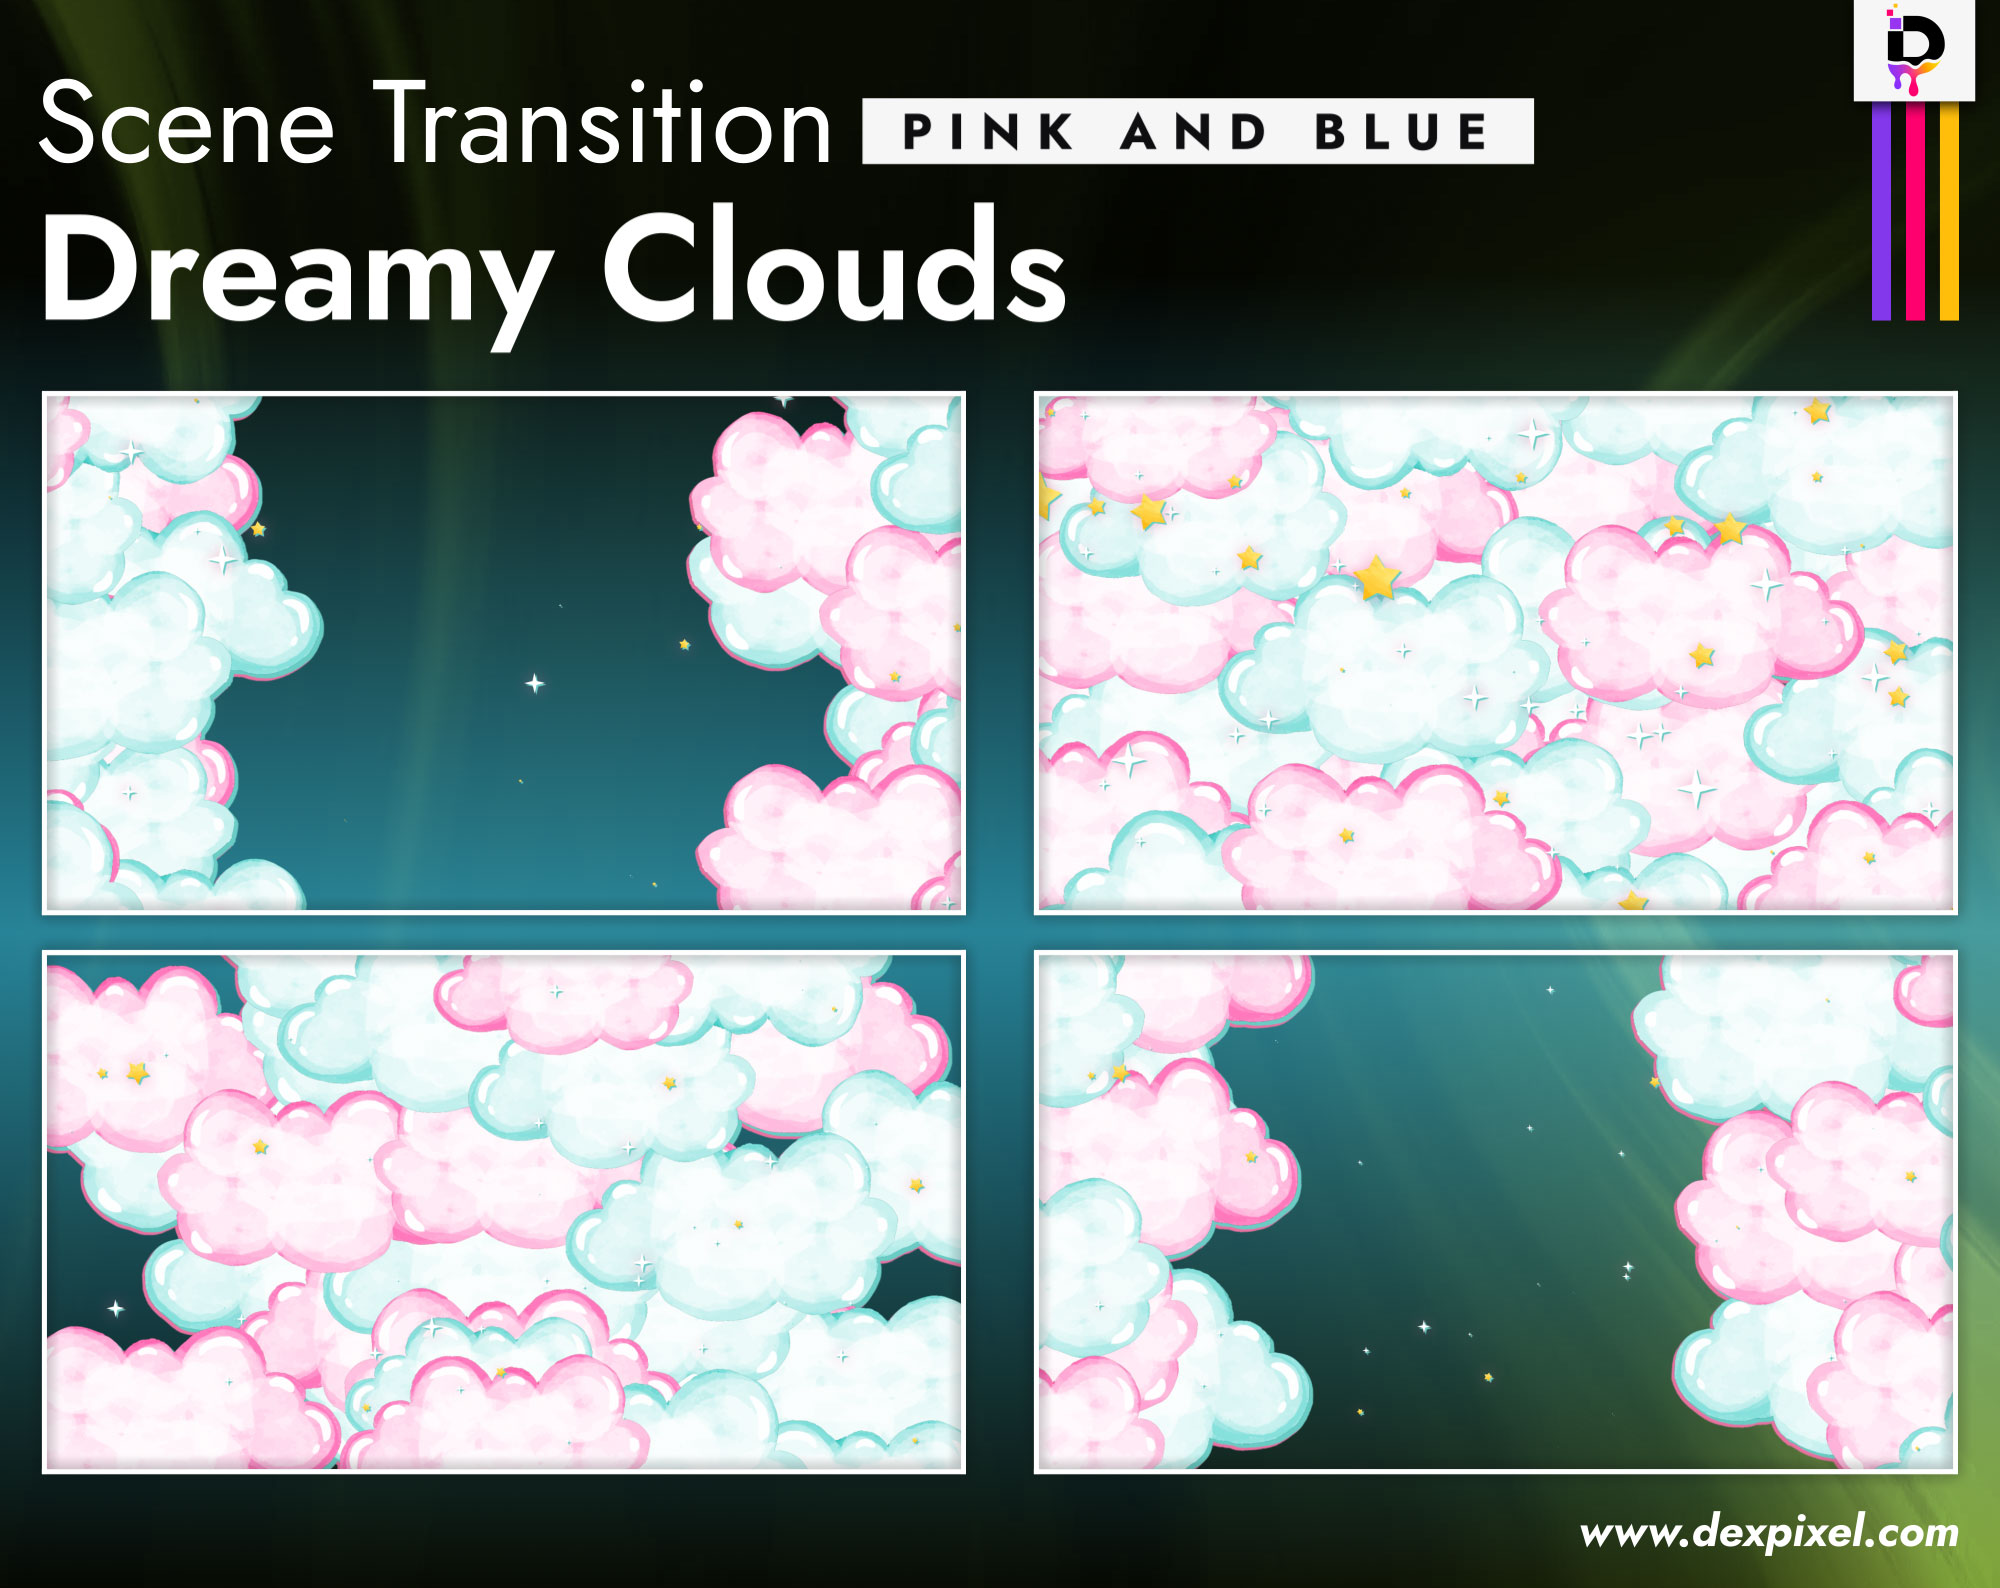 Scene Transition DexPixel Thumbnail Dreamy Clouds Pink and Blue